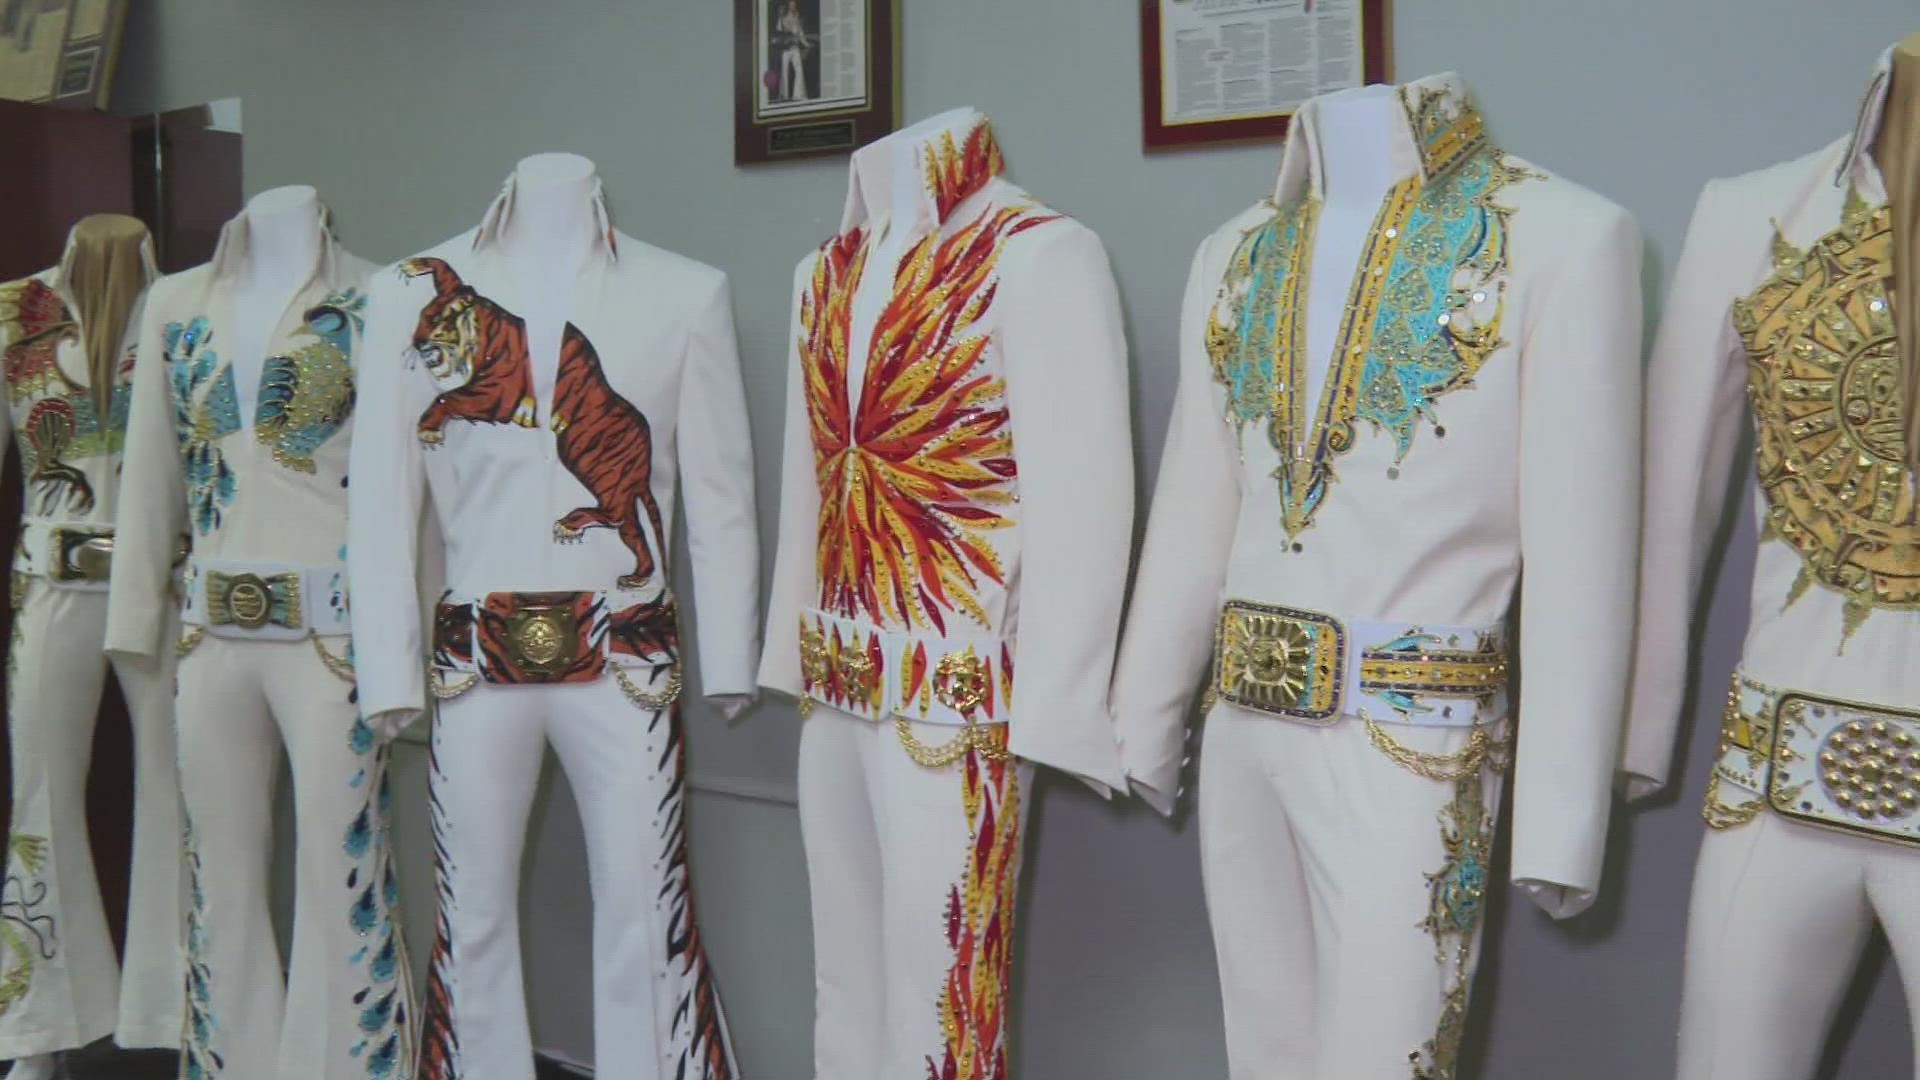 A lifelong Elvis fan, Butch Polston's work was featured in the film 'Elvis', which is now nominated for Best Costume Design.